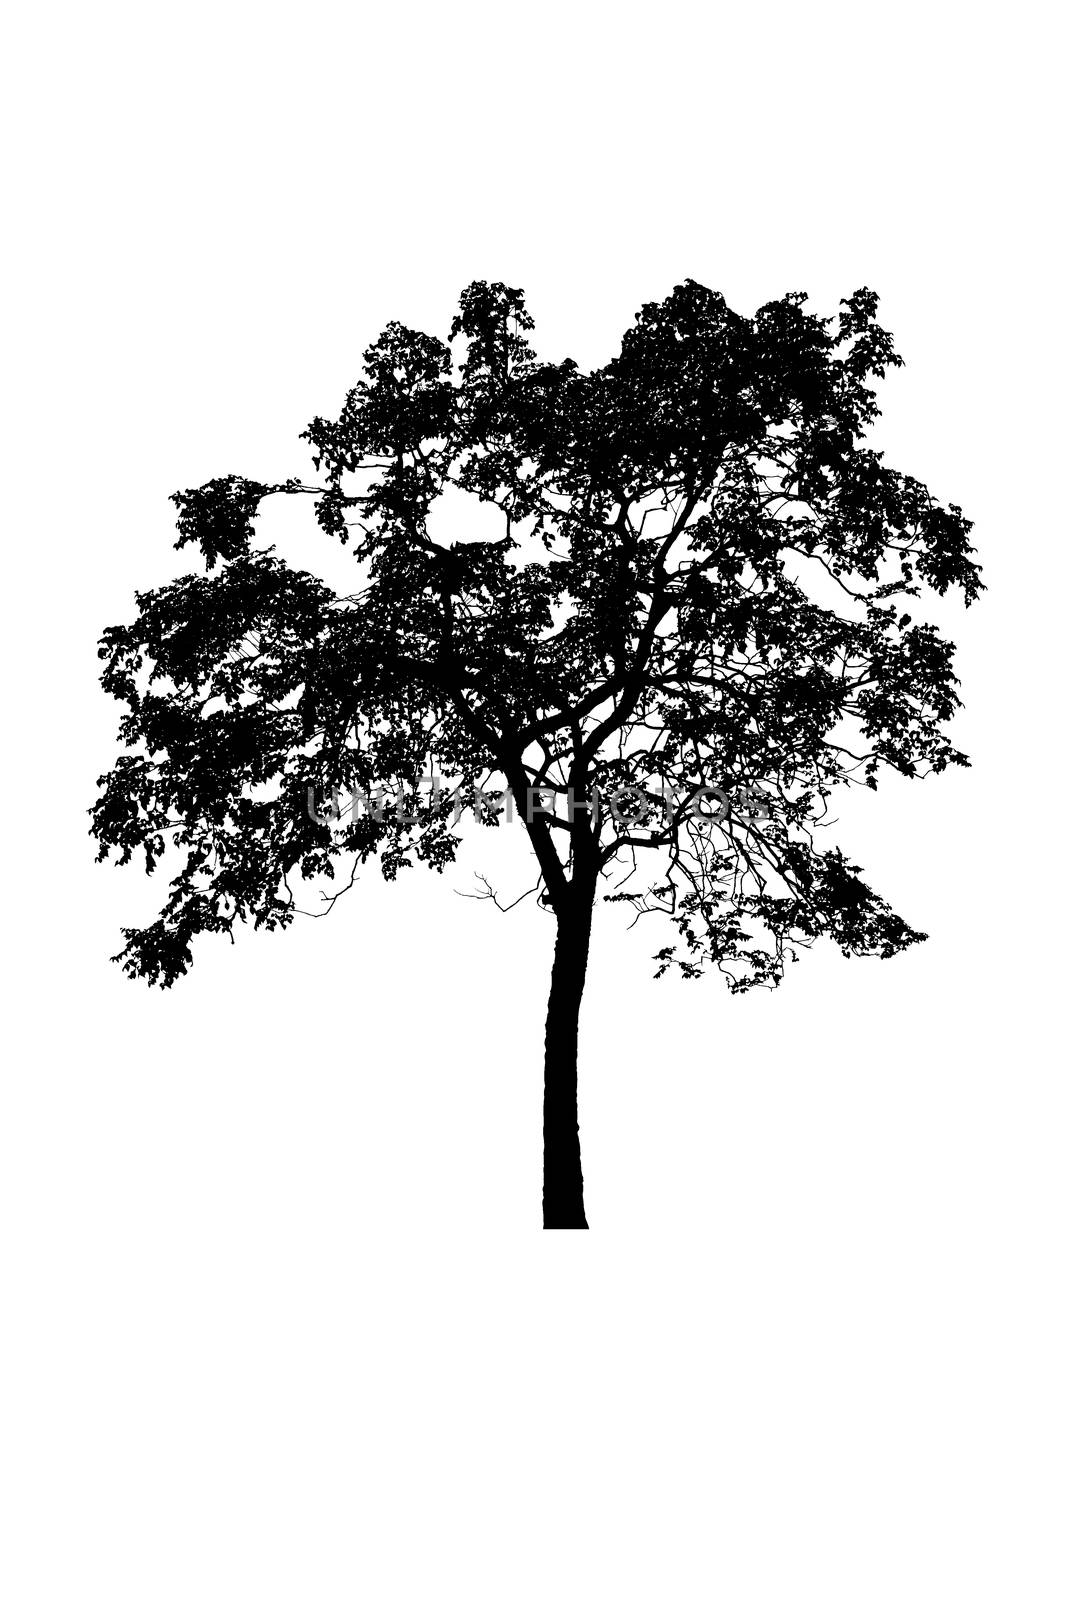 tree silhouettes beautiful isolated on white background by pramot